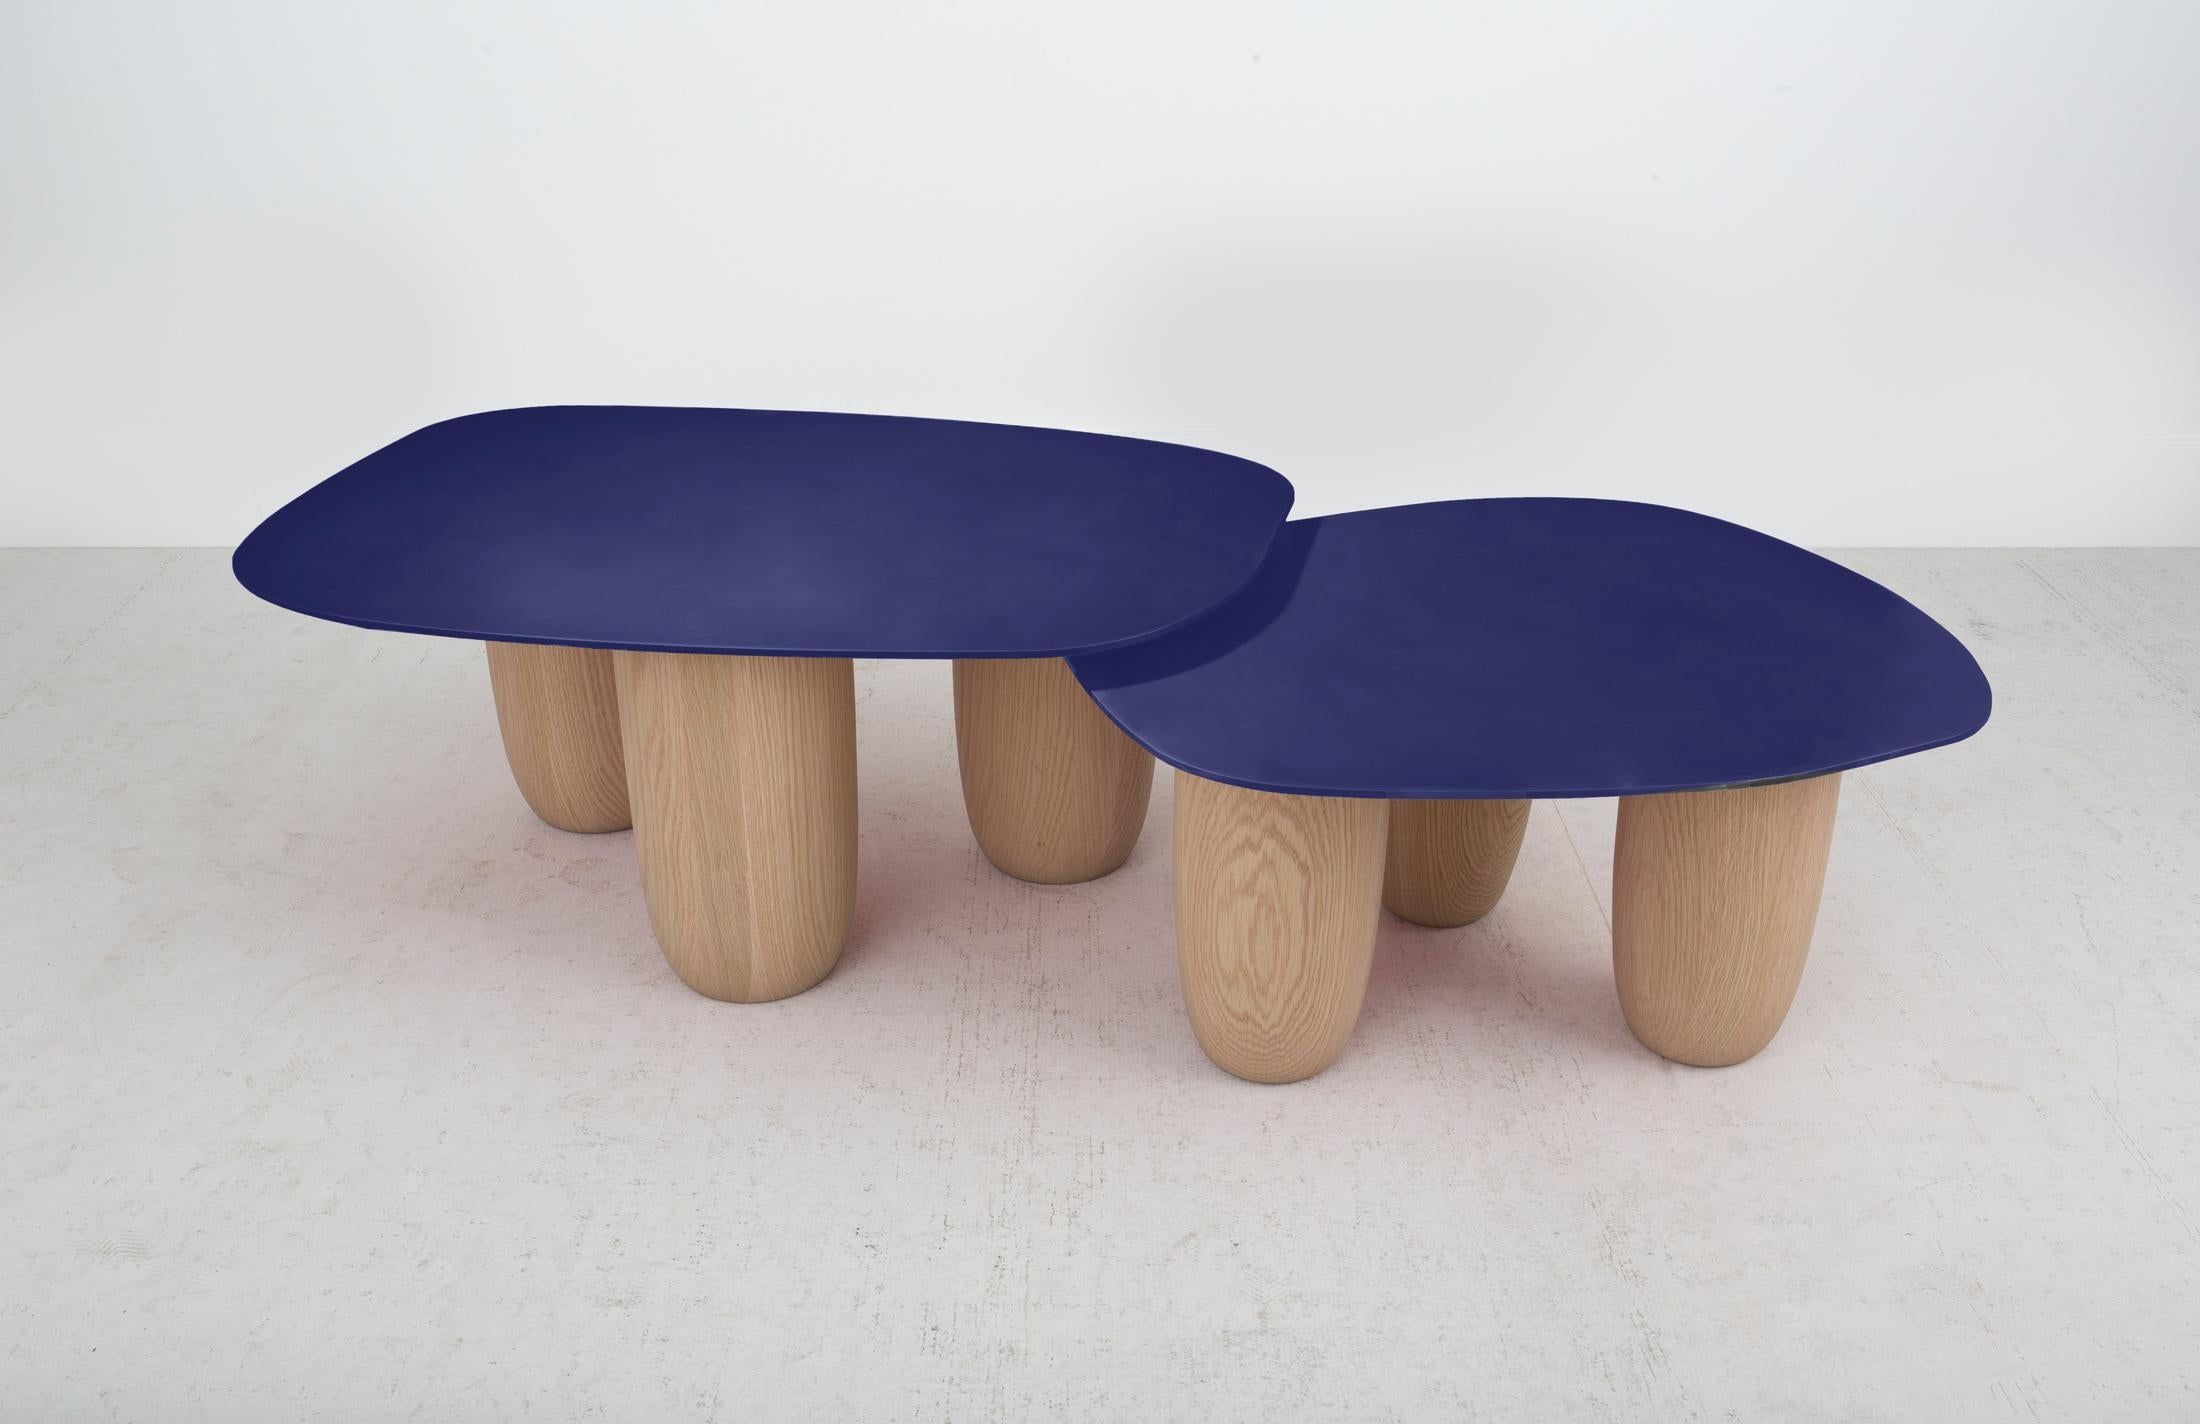 Our contemporary low Sumo table in steel and solid oak are now offered in various finishes. The original Sumo tables were introduced at Design Miami 2020. This design was influenced by Japanese minimalist aesthetics and very much inspired by the